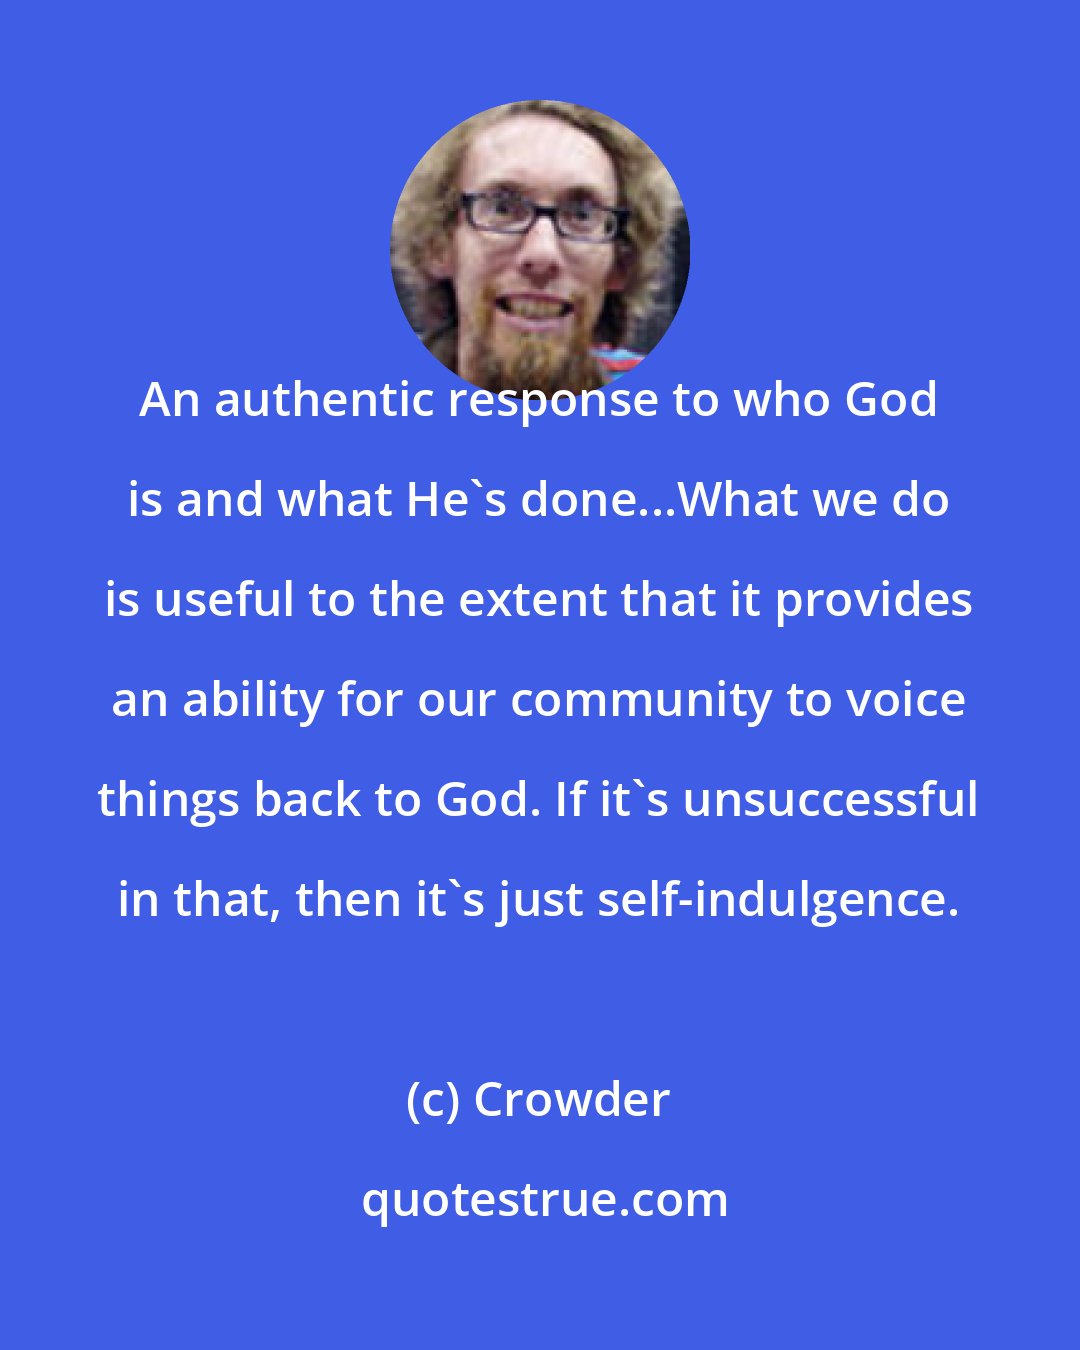 Crowder: An authentic response to who God is and what He's done...What we do is useful to the extent that it provides an ability for our community to voice things back to God. If it's unsuccessful in that, then it's just self-indulgence.